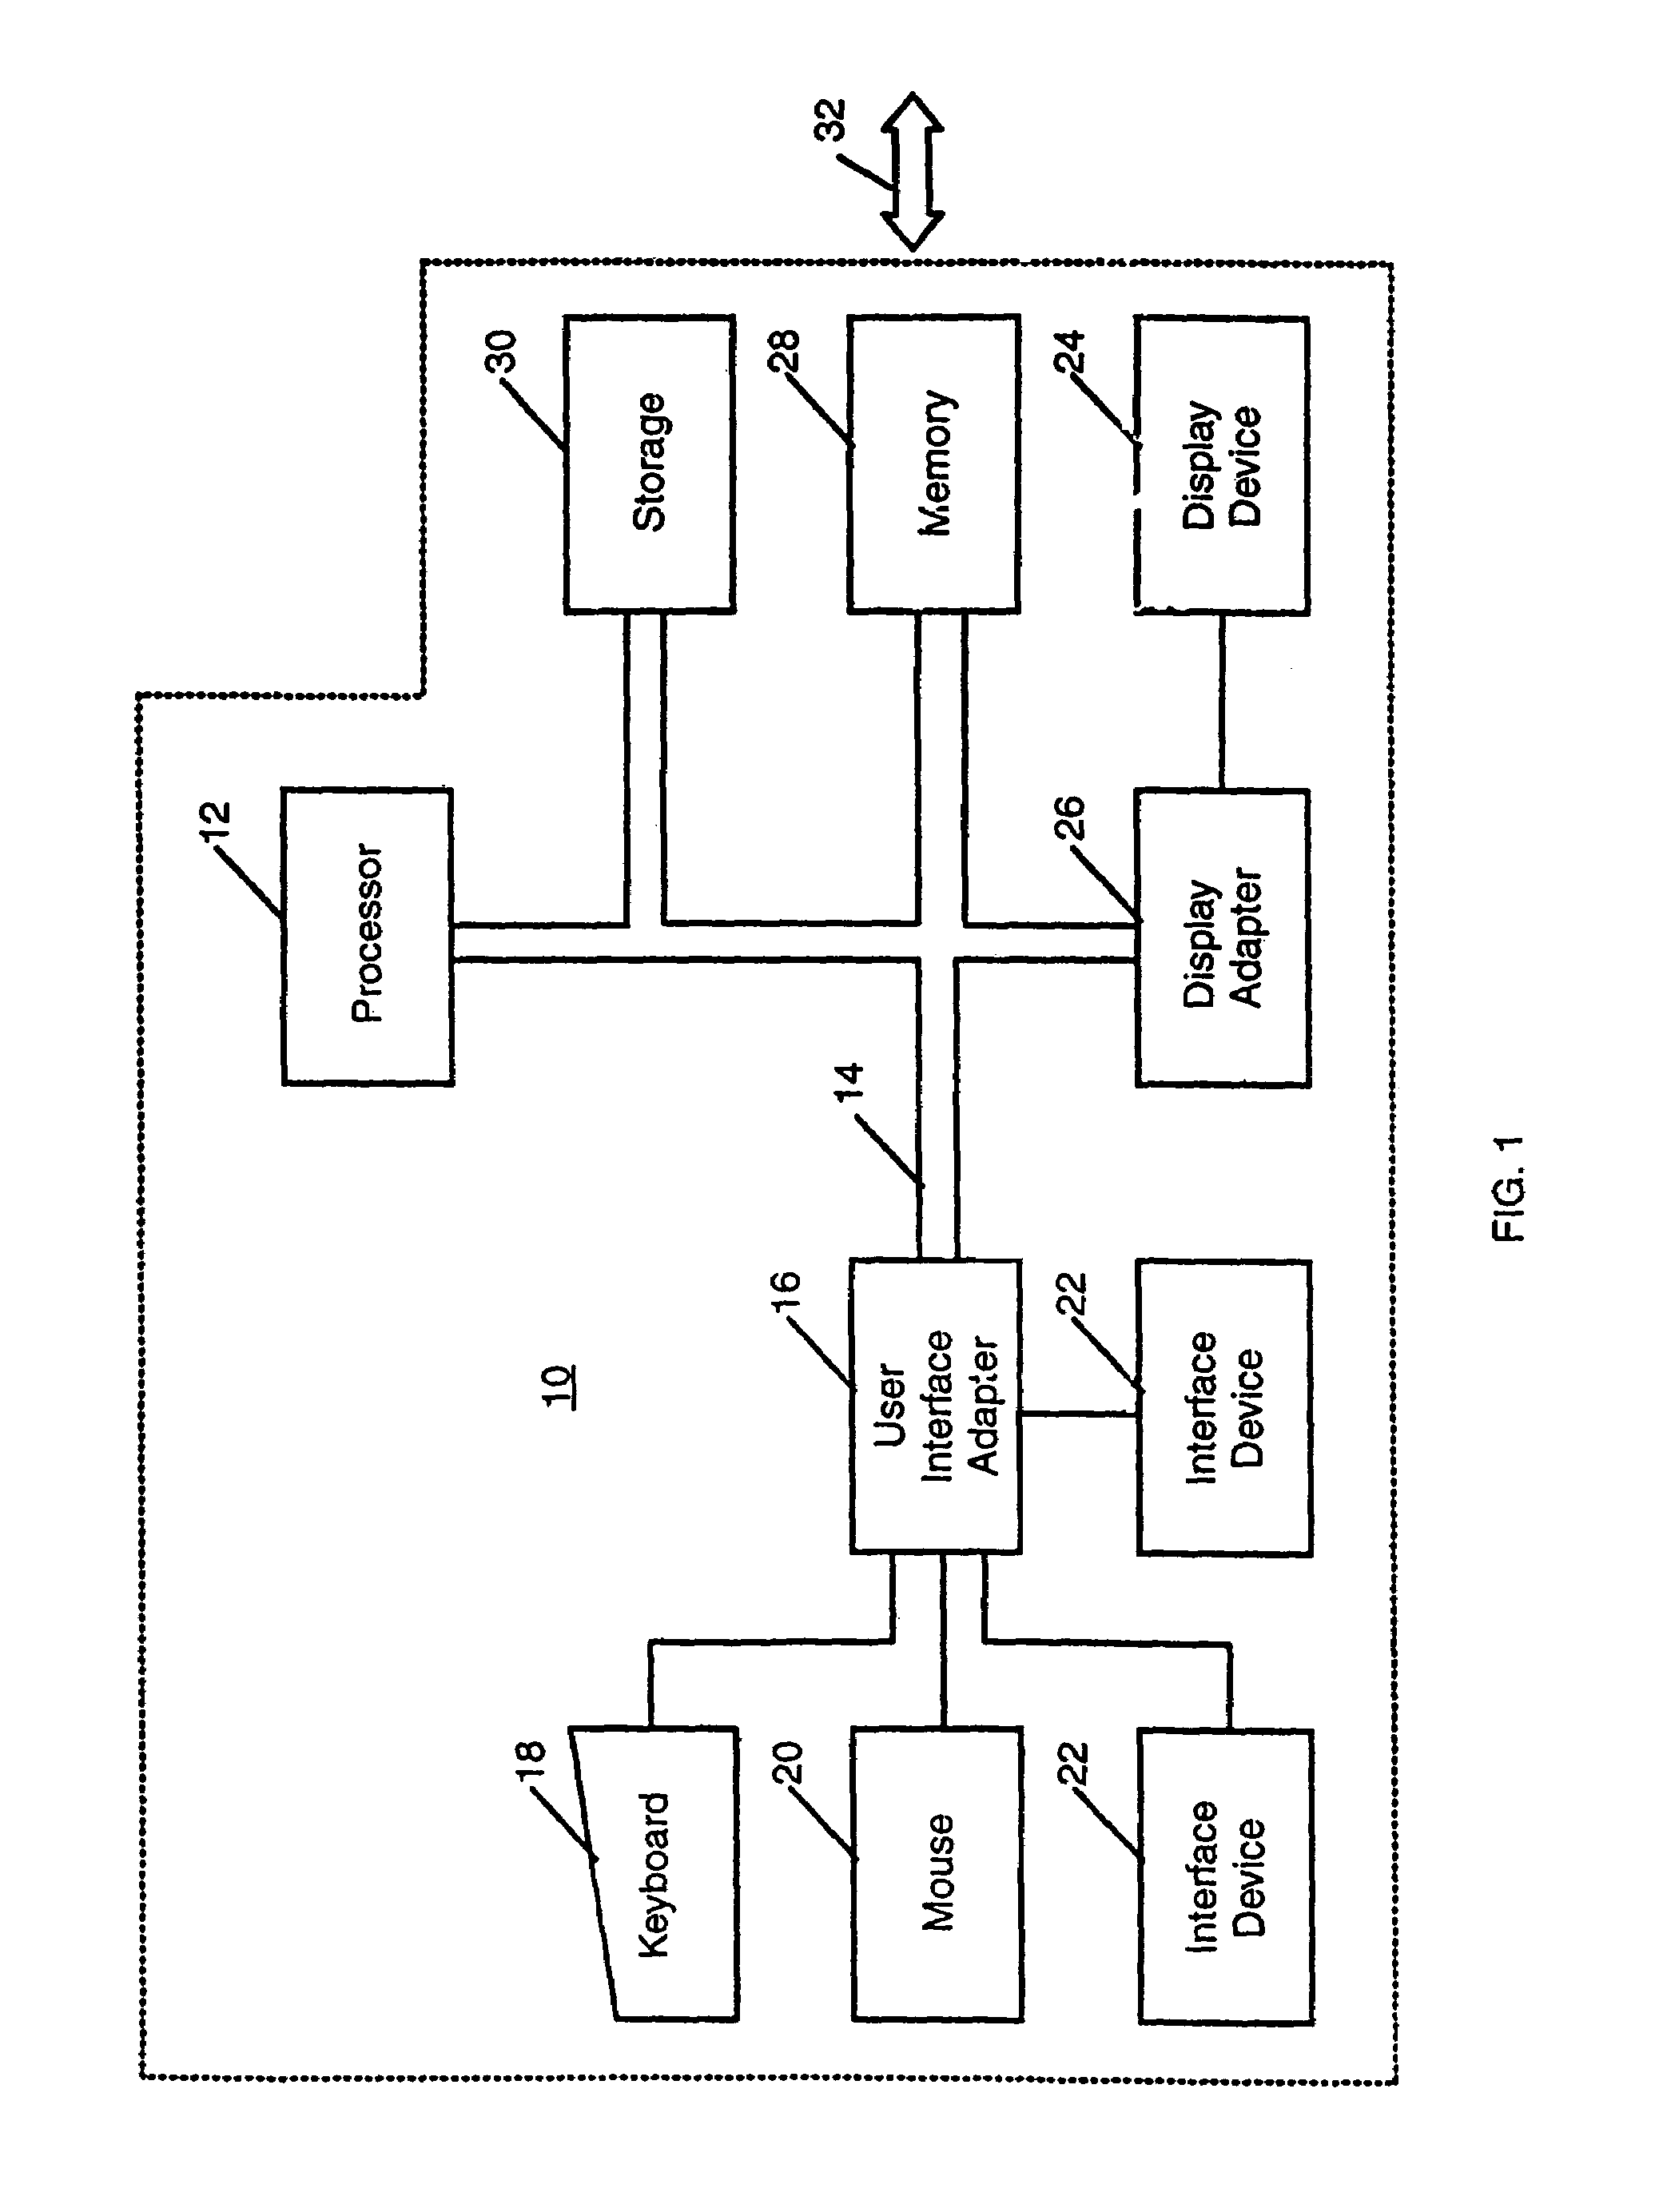 Method and system for SGML-to-HTML migration to XML-based system